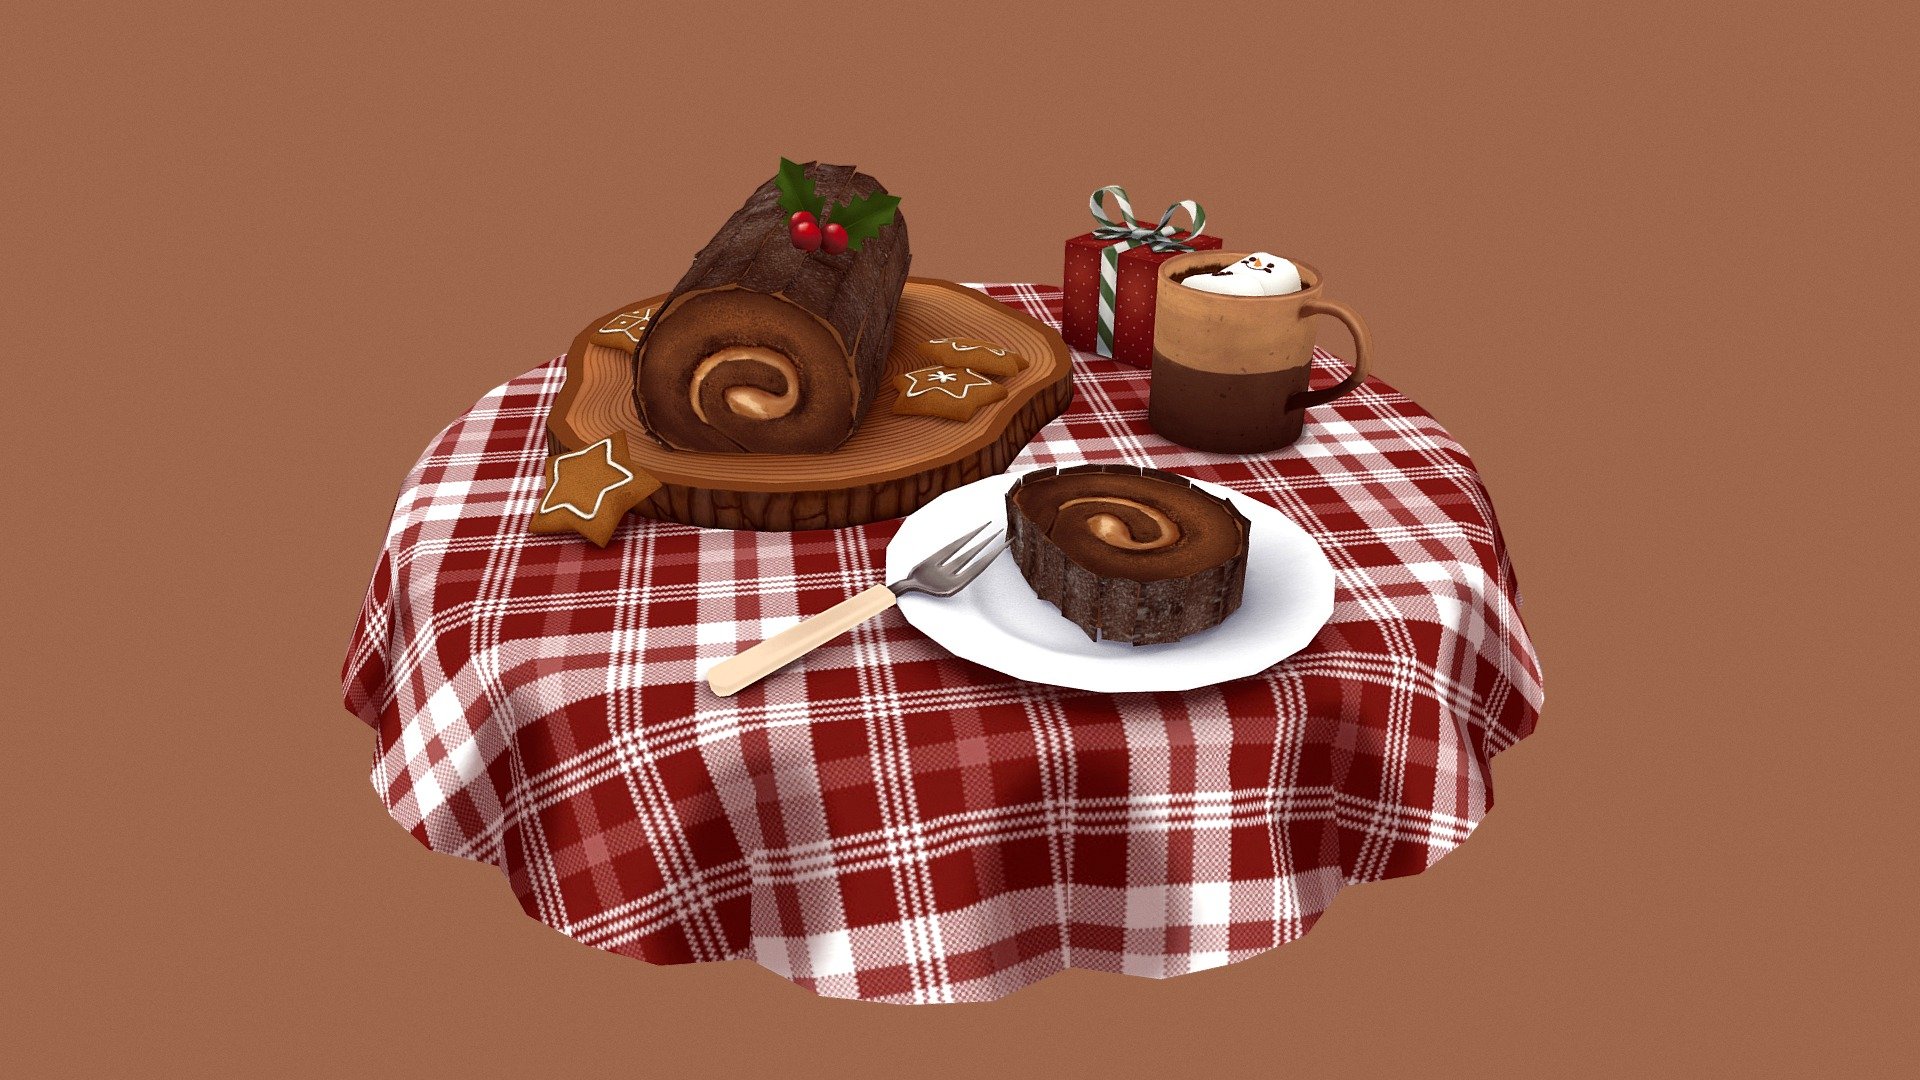 Late for Christmas but Happy New Year everyone! My feel-good little christmas project is done. First time texturing and modelling food! Painting the textures, especially the yule log was really fun 3d model